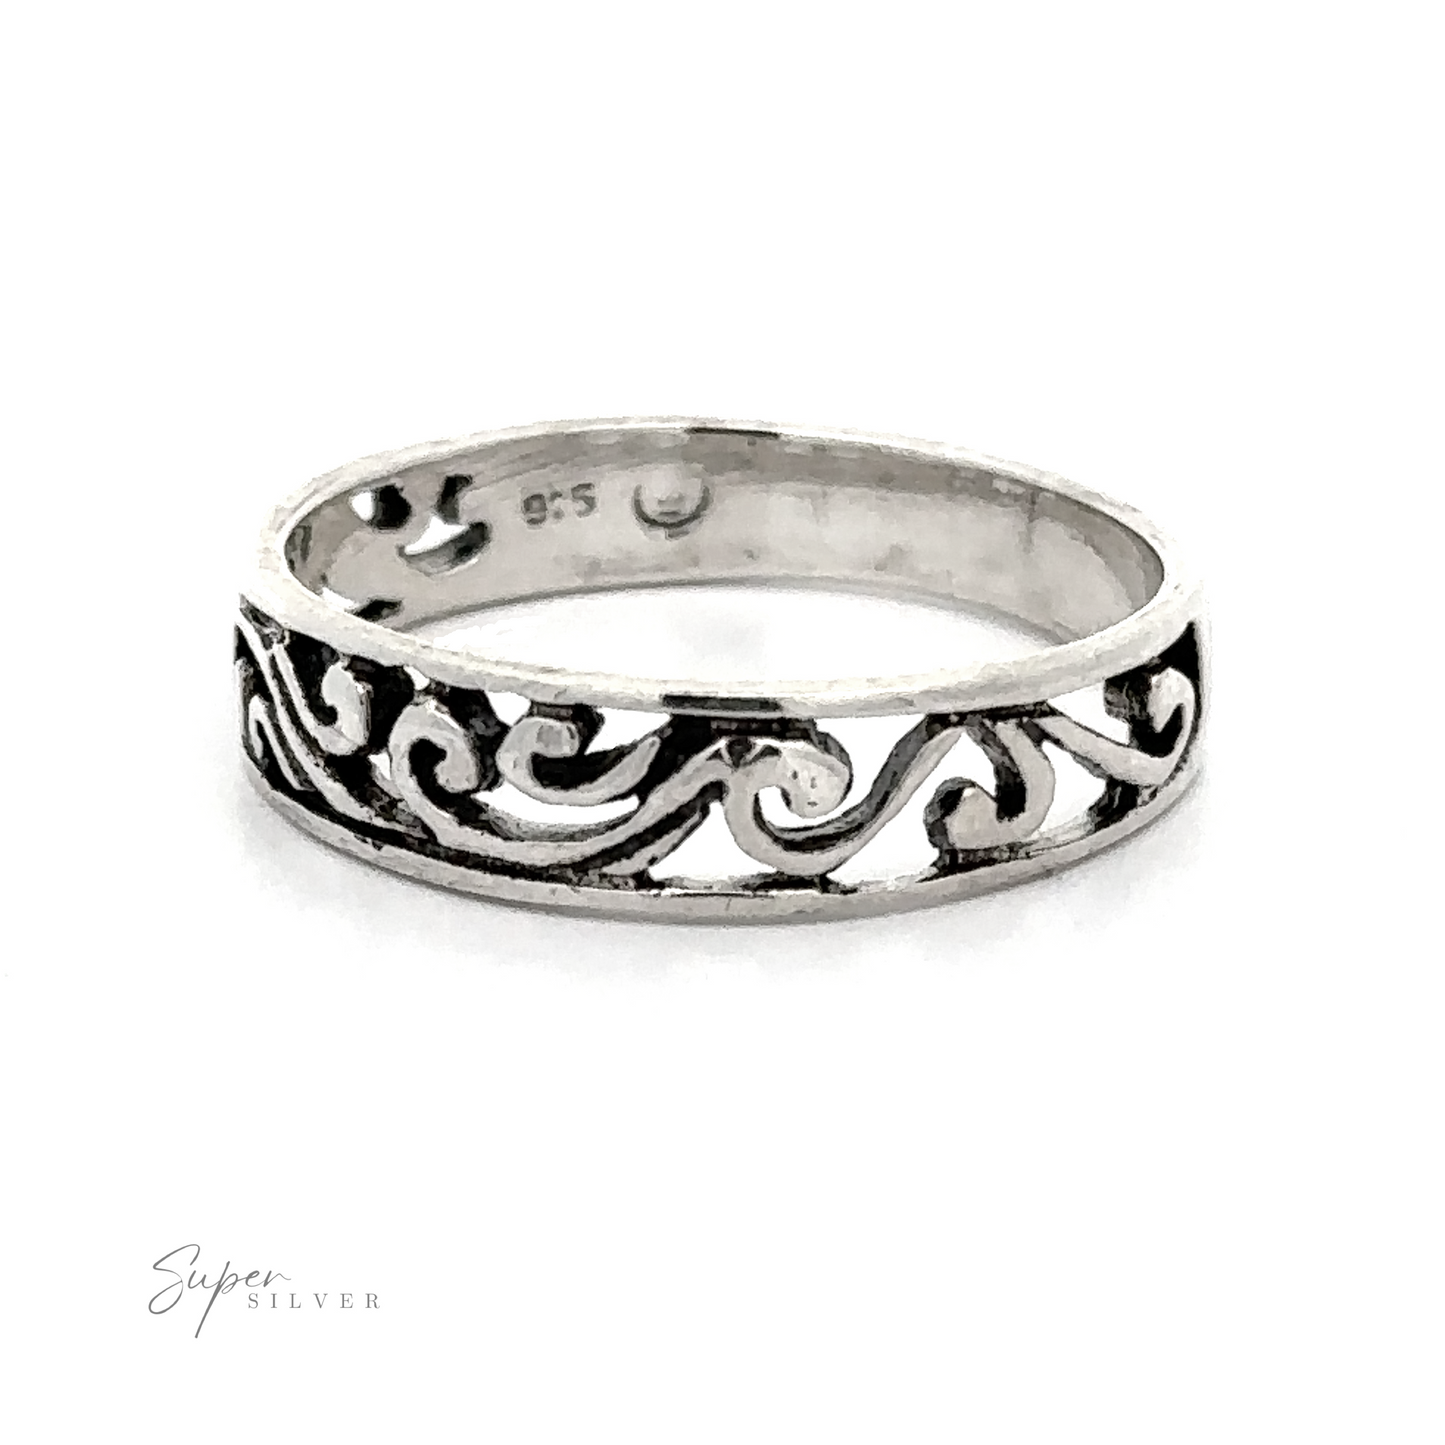 A Beautiful Open Filigree Band with a swirl and filigree design.